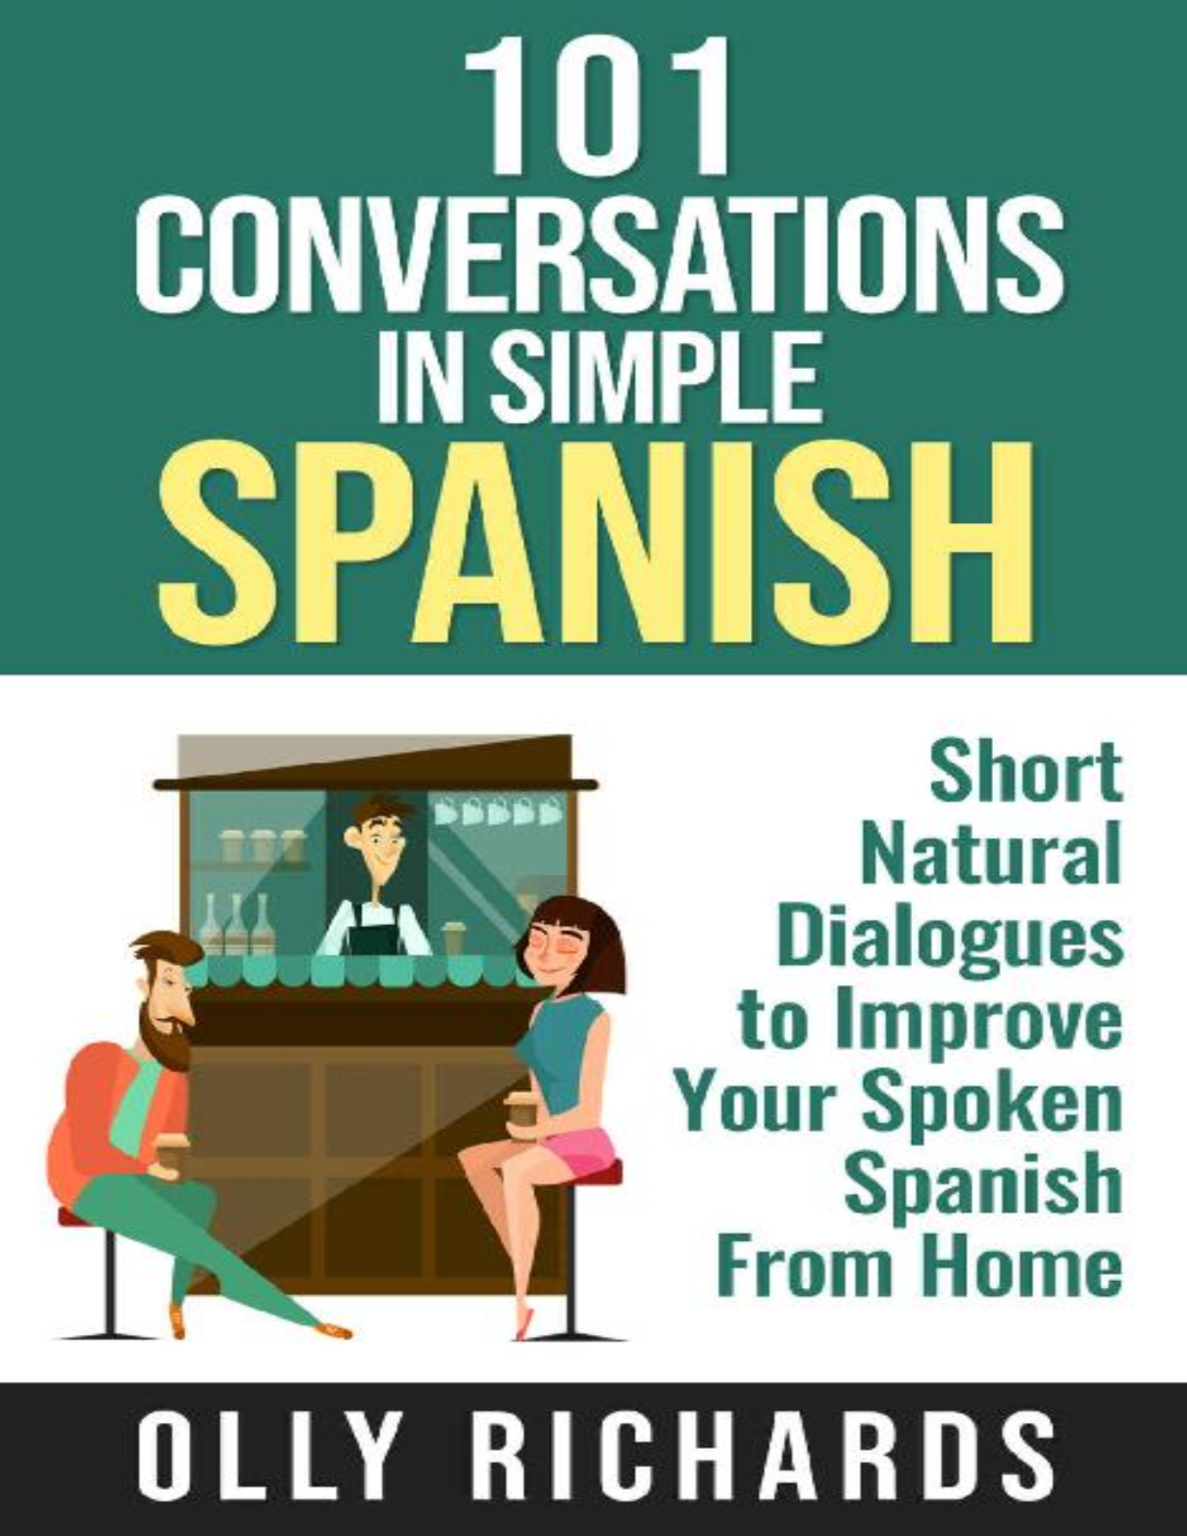 Rich results on Google's SERP when searching for ''101-Conversations-in-Simple-Spanish''